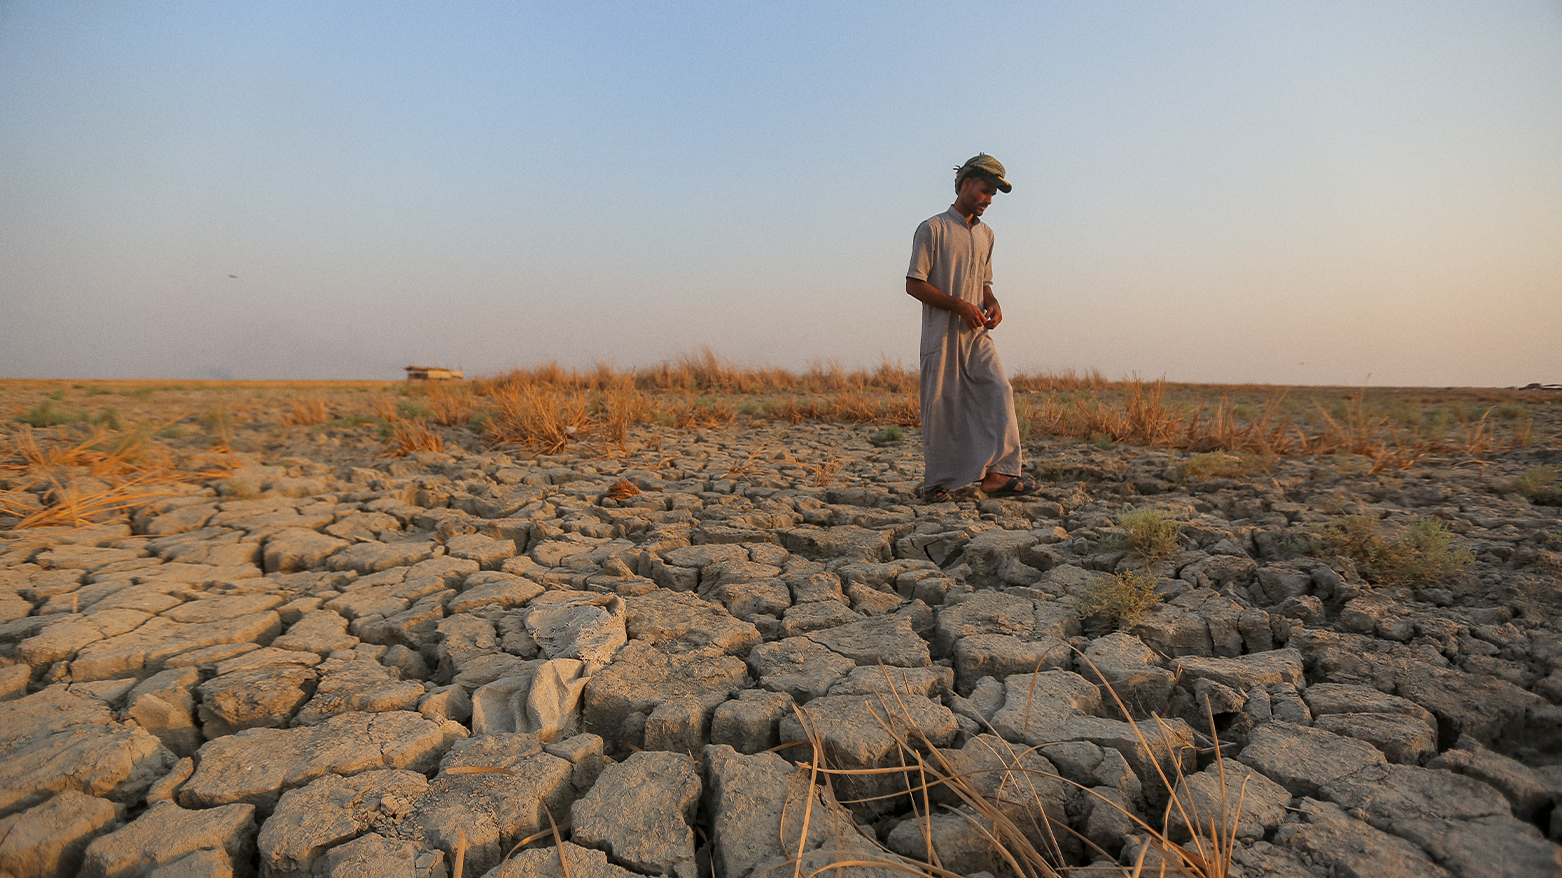 A fisherman walks across a dry patch of land in the marshes in Dhi Qar province, Iraq, Sept. 2, 2022. (Photo: AP)